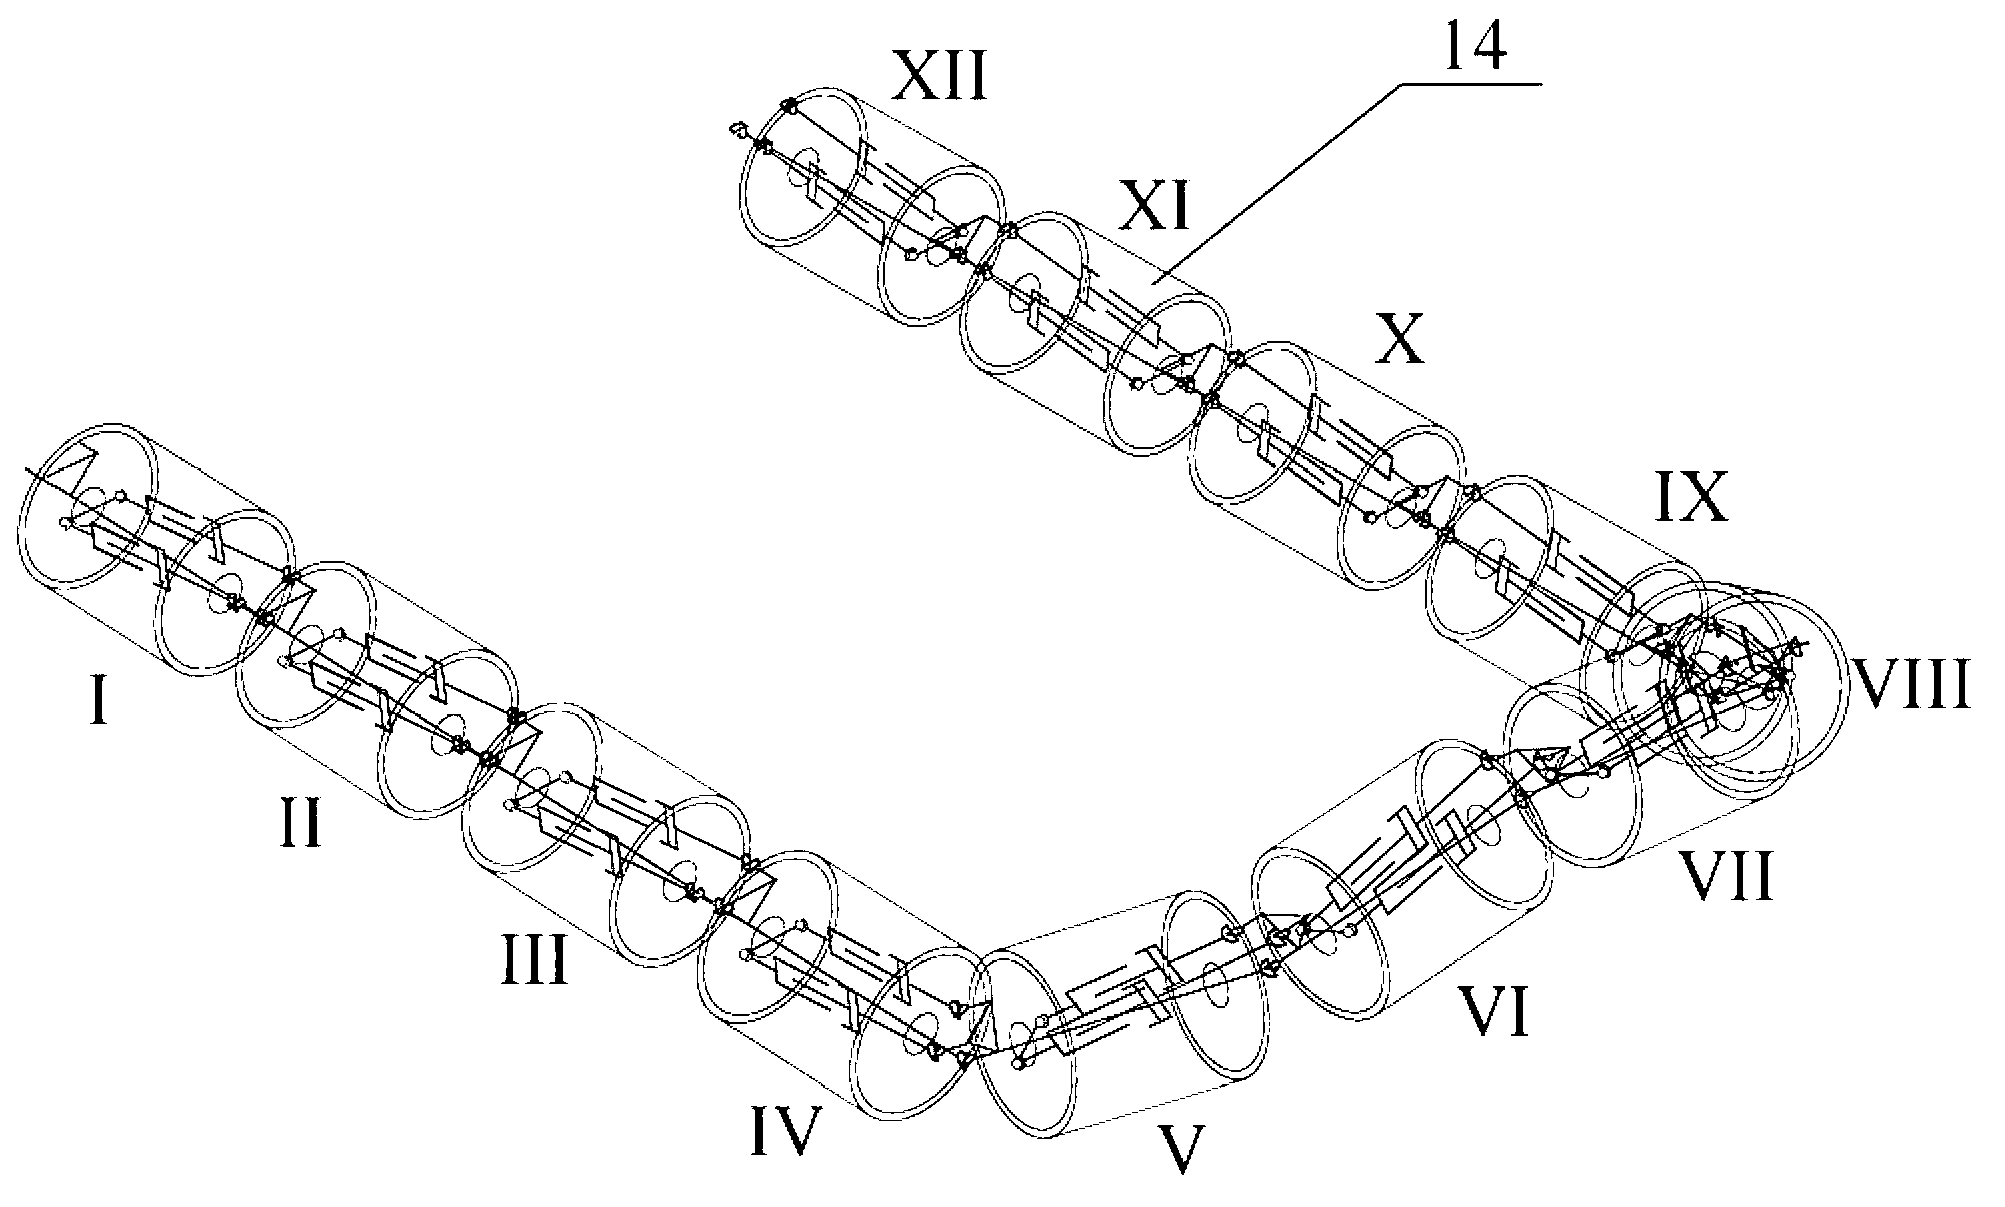 Variable rigidity parallel joint snake-shaped robot mechanism